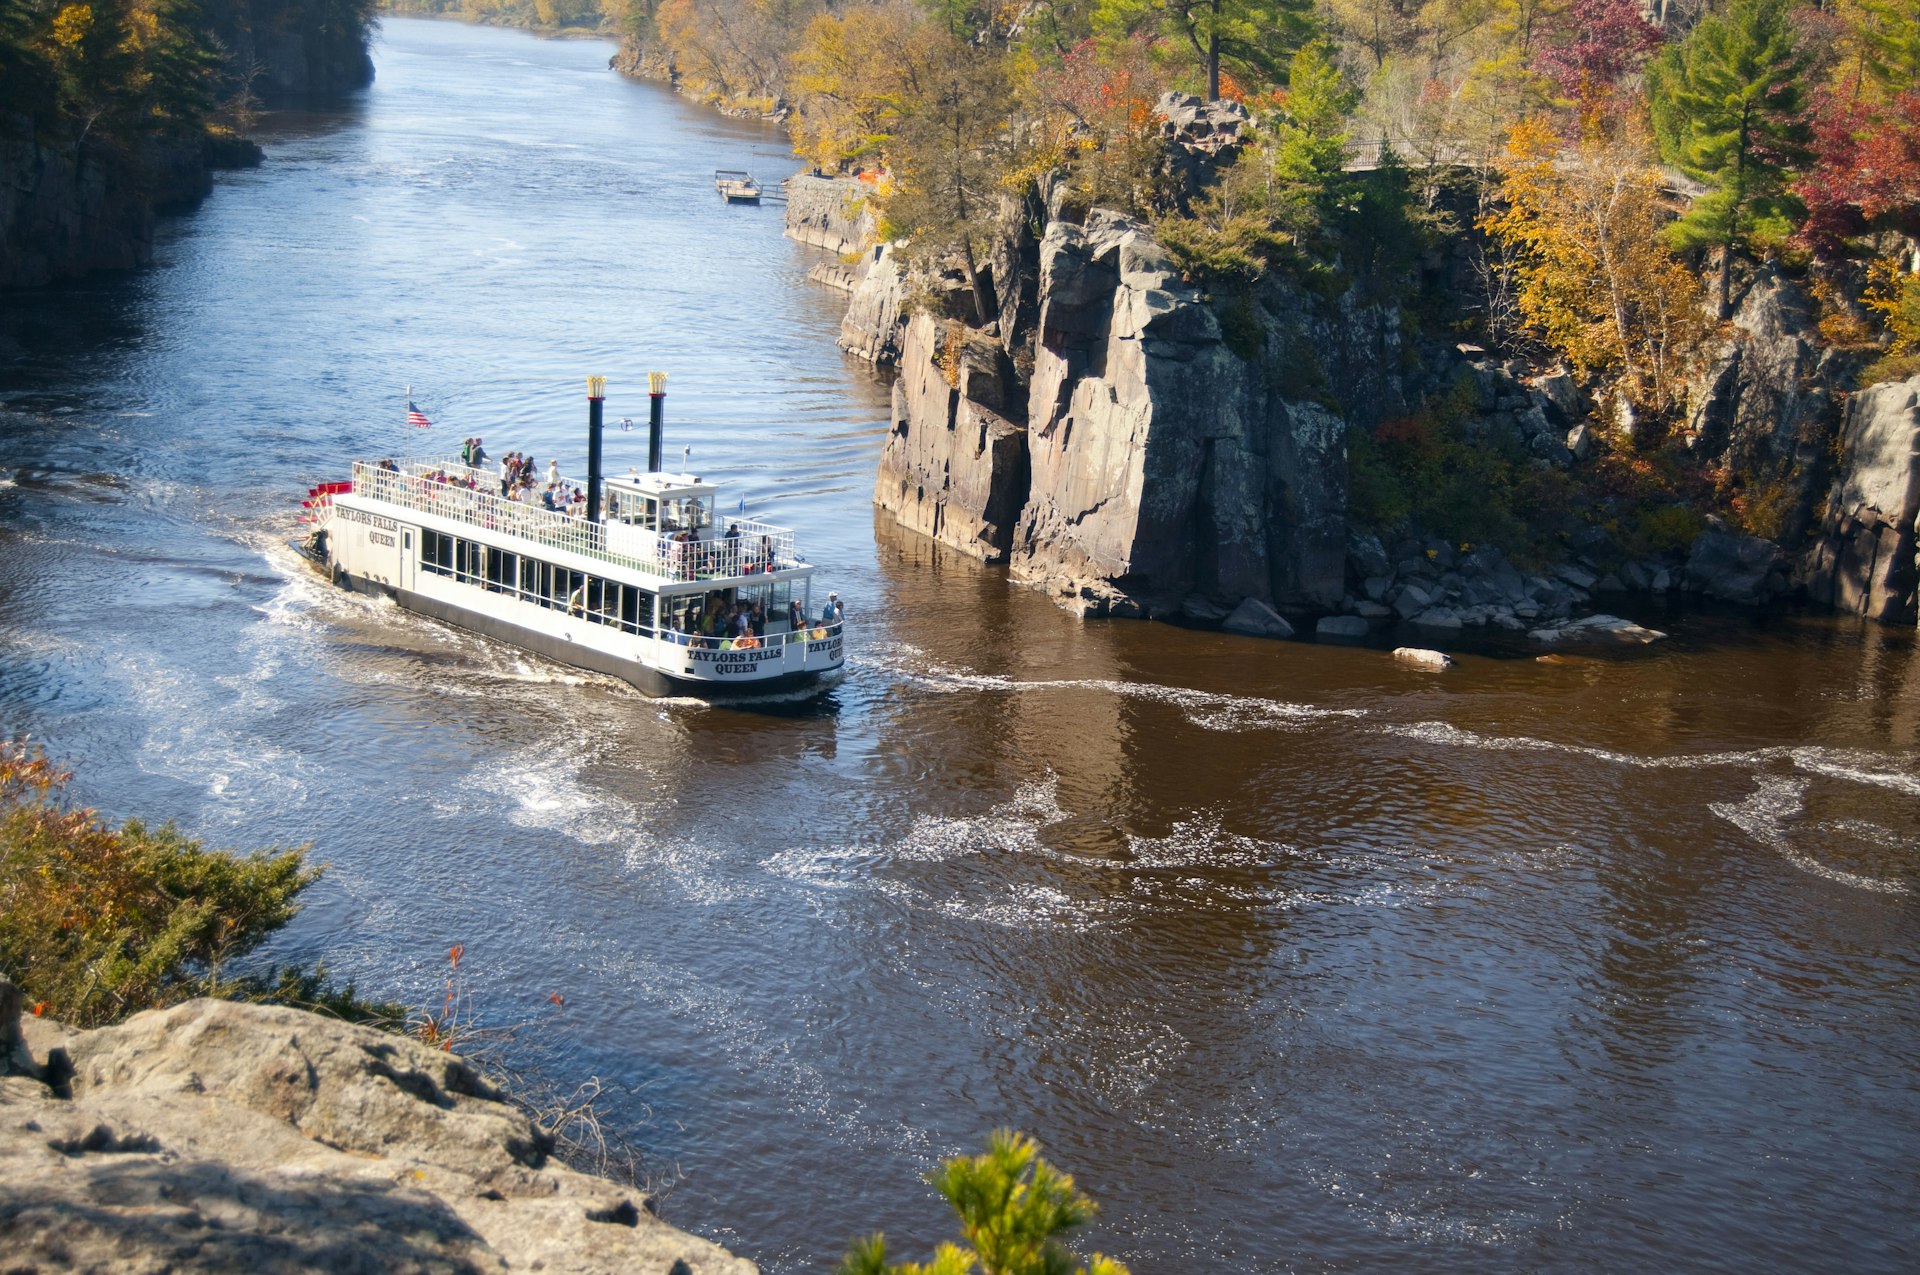 A paddleboat travels down the St Croix River on an autumn day.